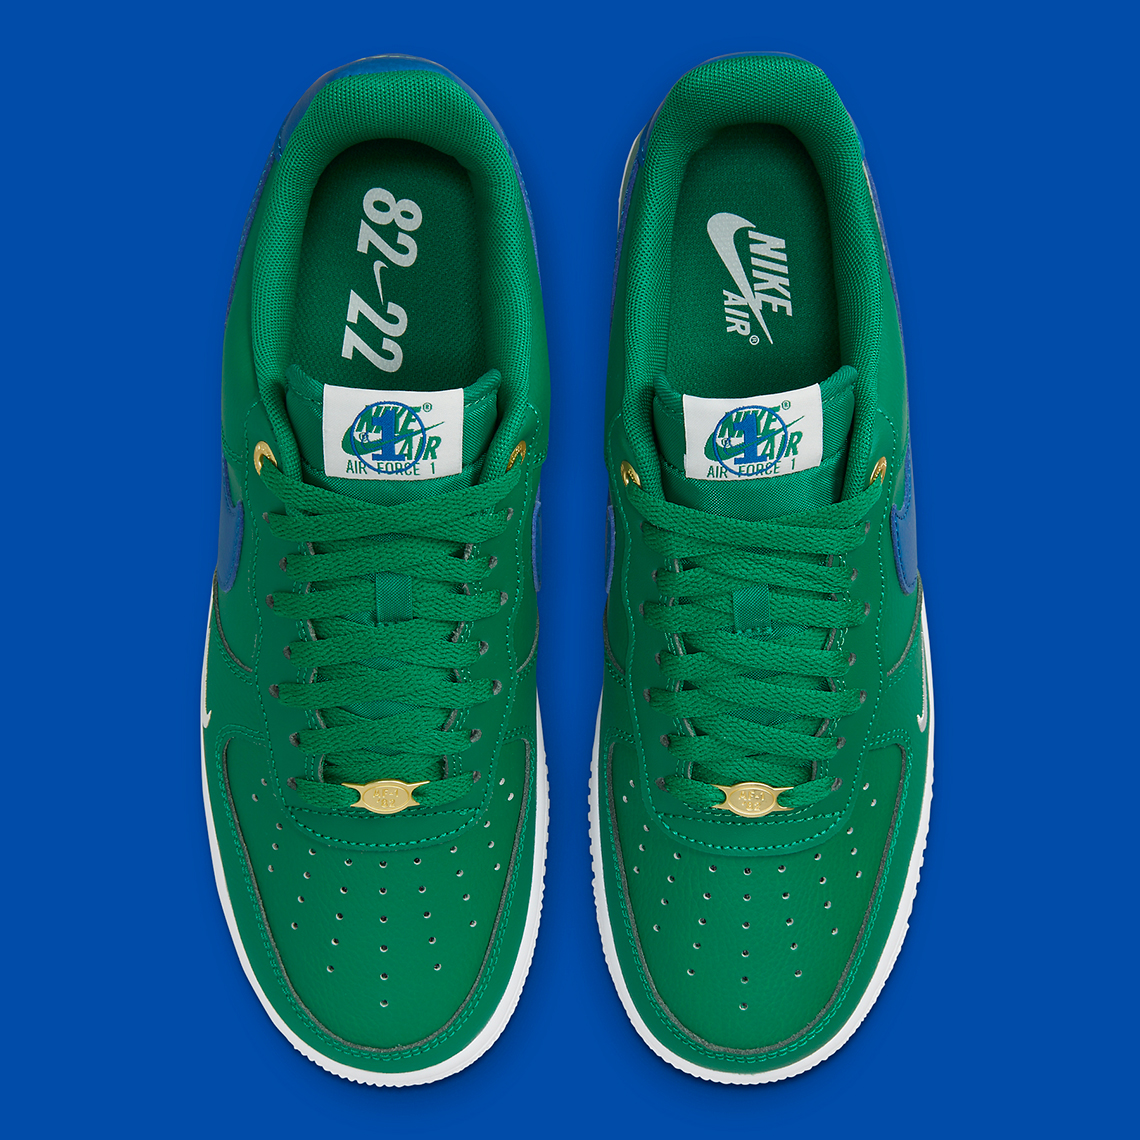 Nike Air air force 1 reflective swoosh Force 1 Low "Malachite" DQ7658-300 | SneakerNews.com